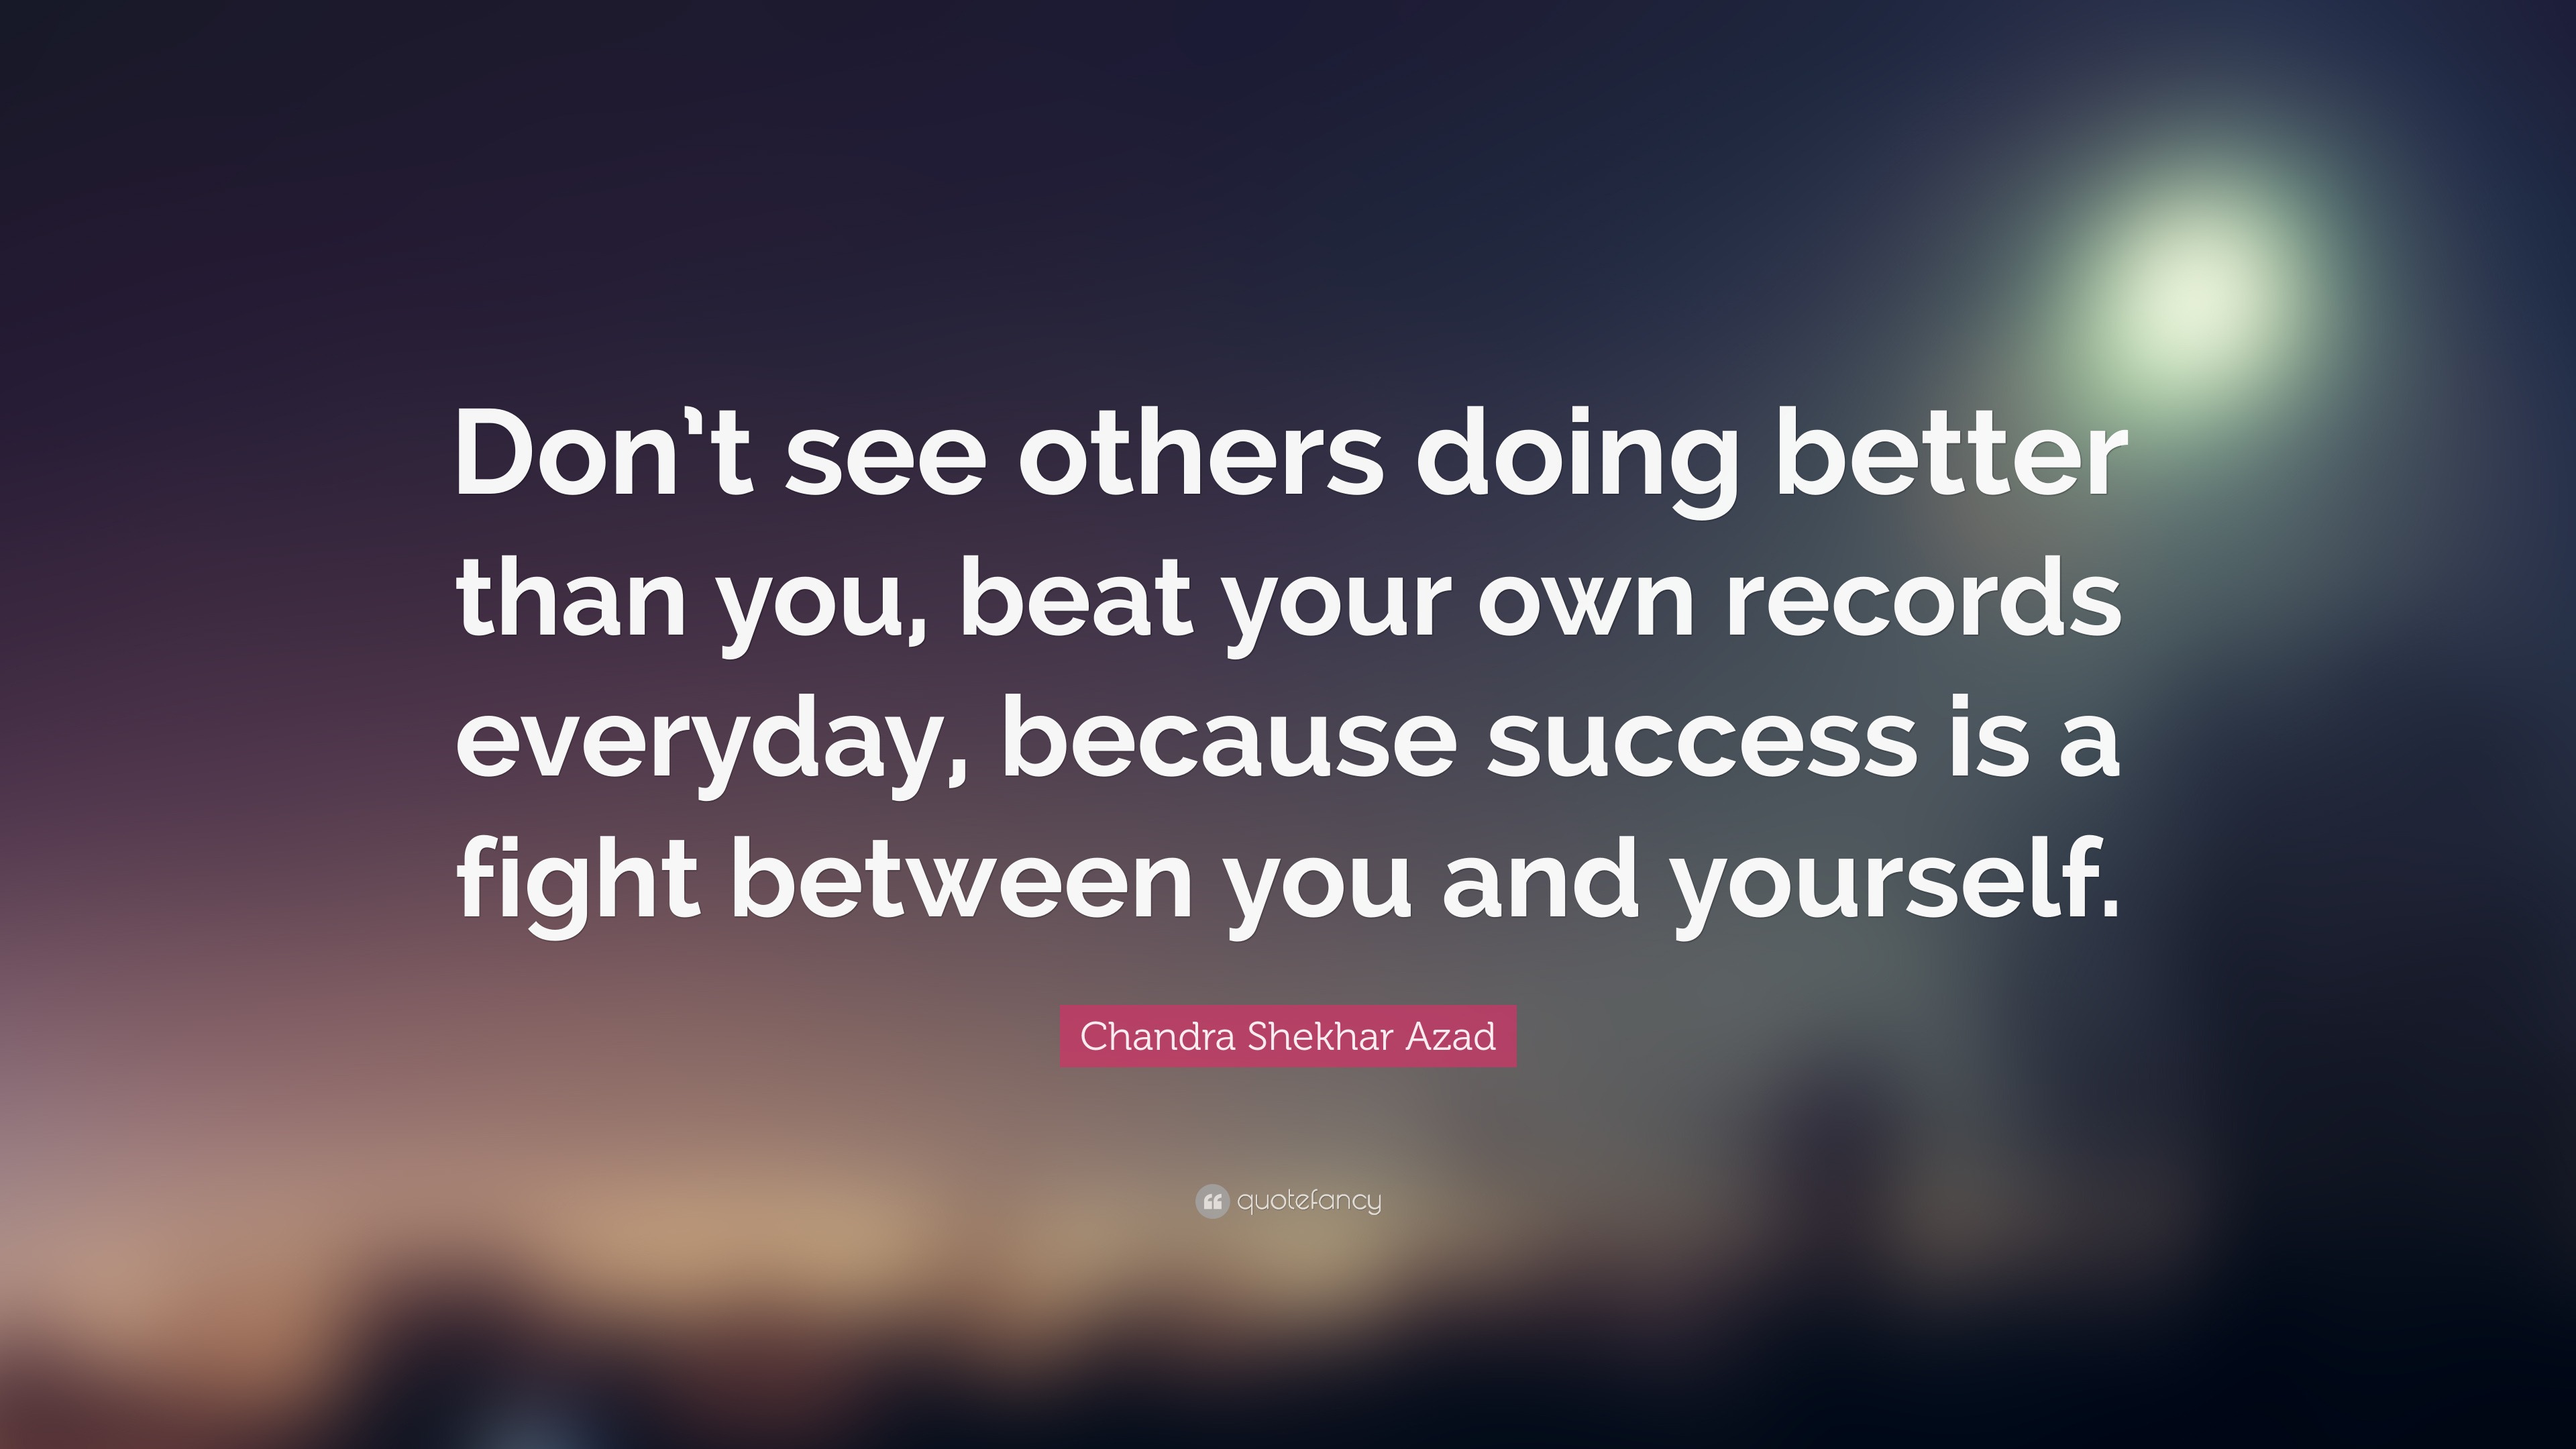 Chandra Shekhar Azad Quote: “Don’t see others doing better than you ...